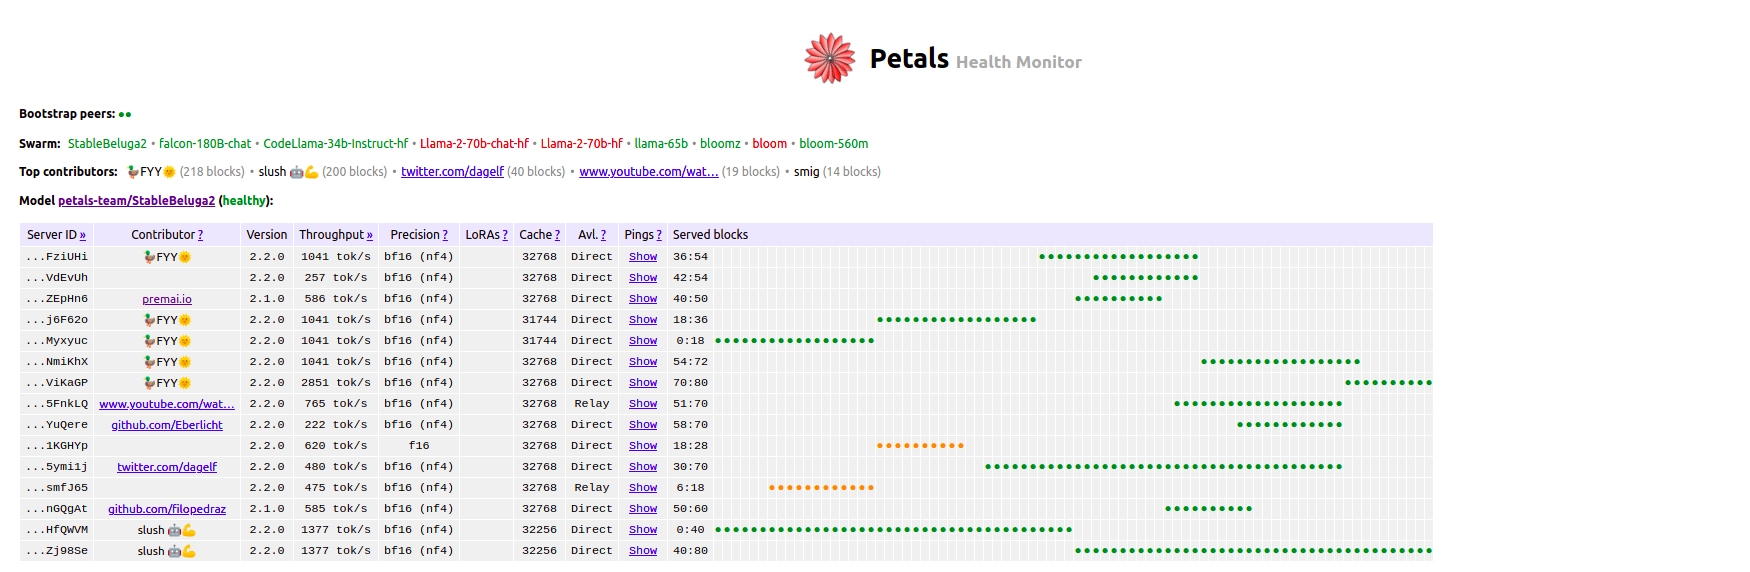 The health monitor of Petals showing the current status of the Stable Beluga 2 model